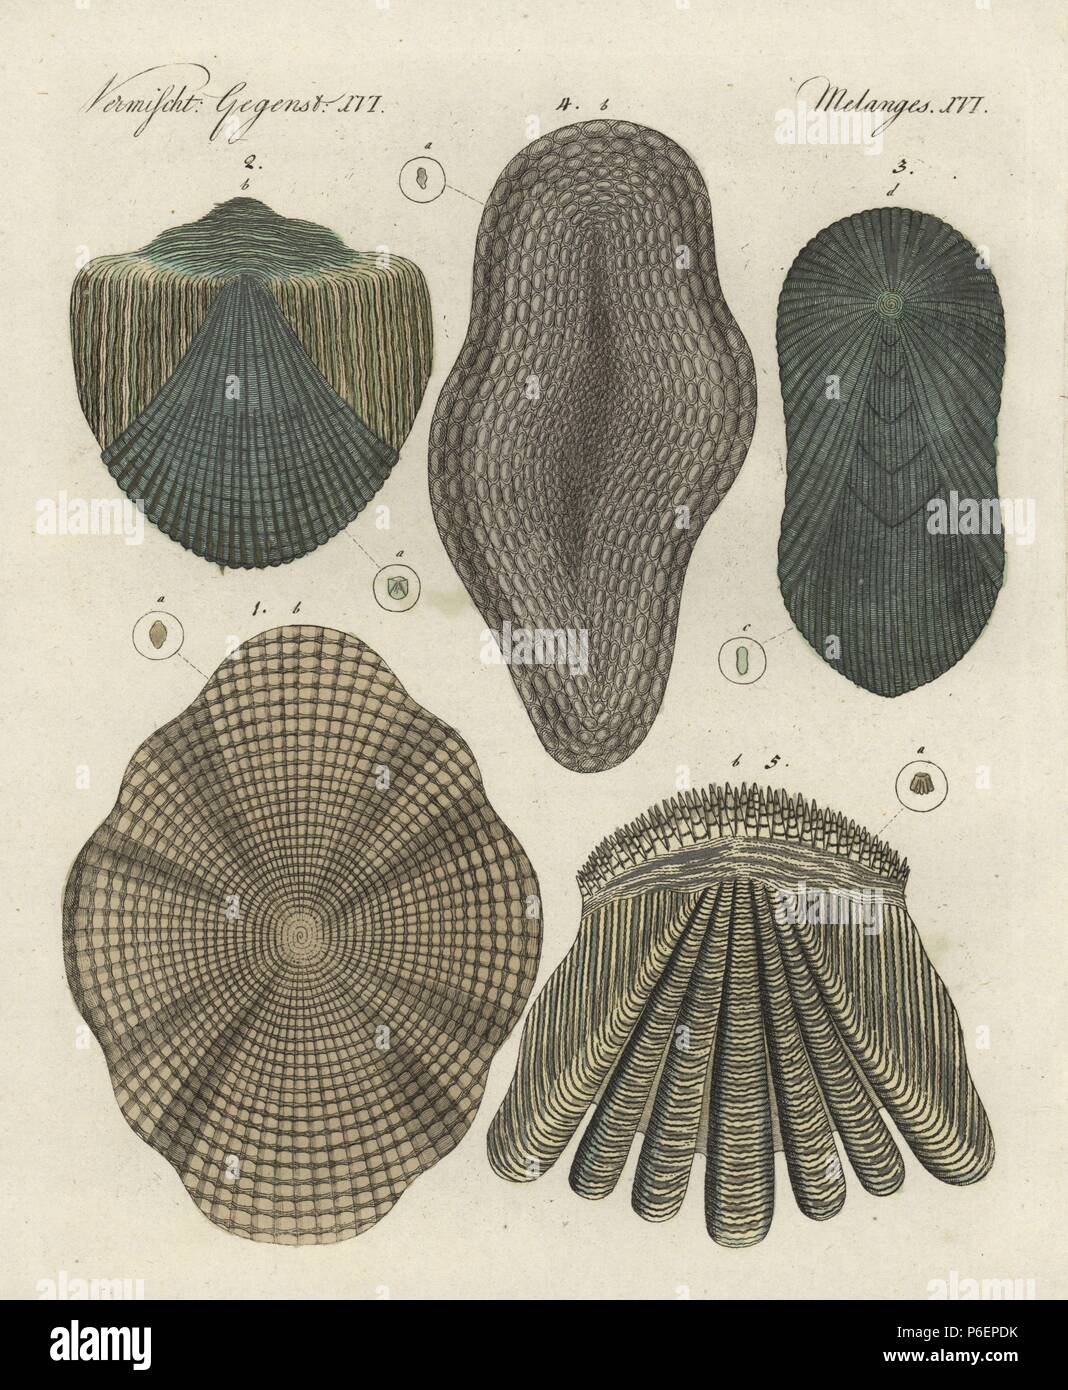 Fish scales: cod, Gadus morhua 1, gudgeon, Gobio gobio 2, tench, Tinca tinca 3, eel, Anguilla anguilla 4 and perch, Perca fluviatilis 5. Handcoloured copperplate engraving from Bertuch's 'Bilderbuch fur Kinder' (Picture Book for Children), Weimar, 1798. Friedrich Johann Bertuch (1747-1822) was a German publisher and man of arts most famous for his 12-volume encyclopedia for children illustrated with 1,200 engraved plates on natural history, science, costume, mythology, etc., published from 1790-1830. Stock Photo